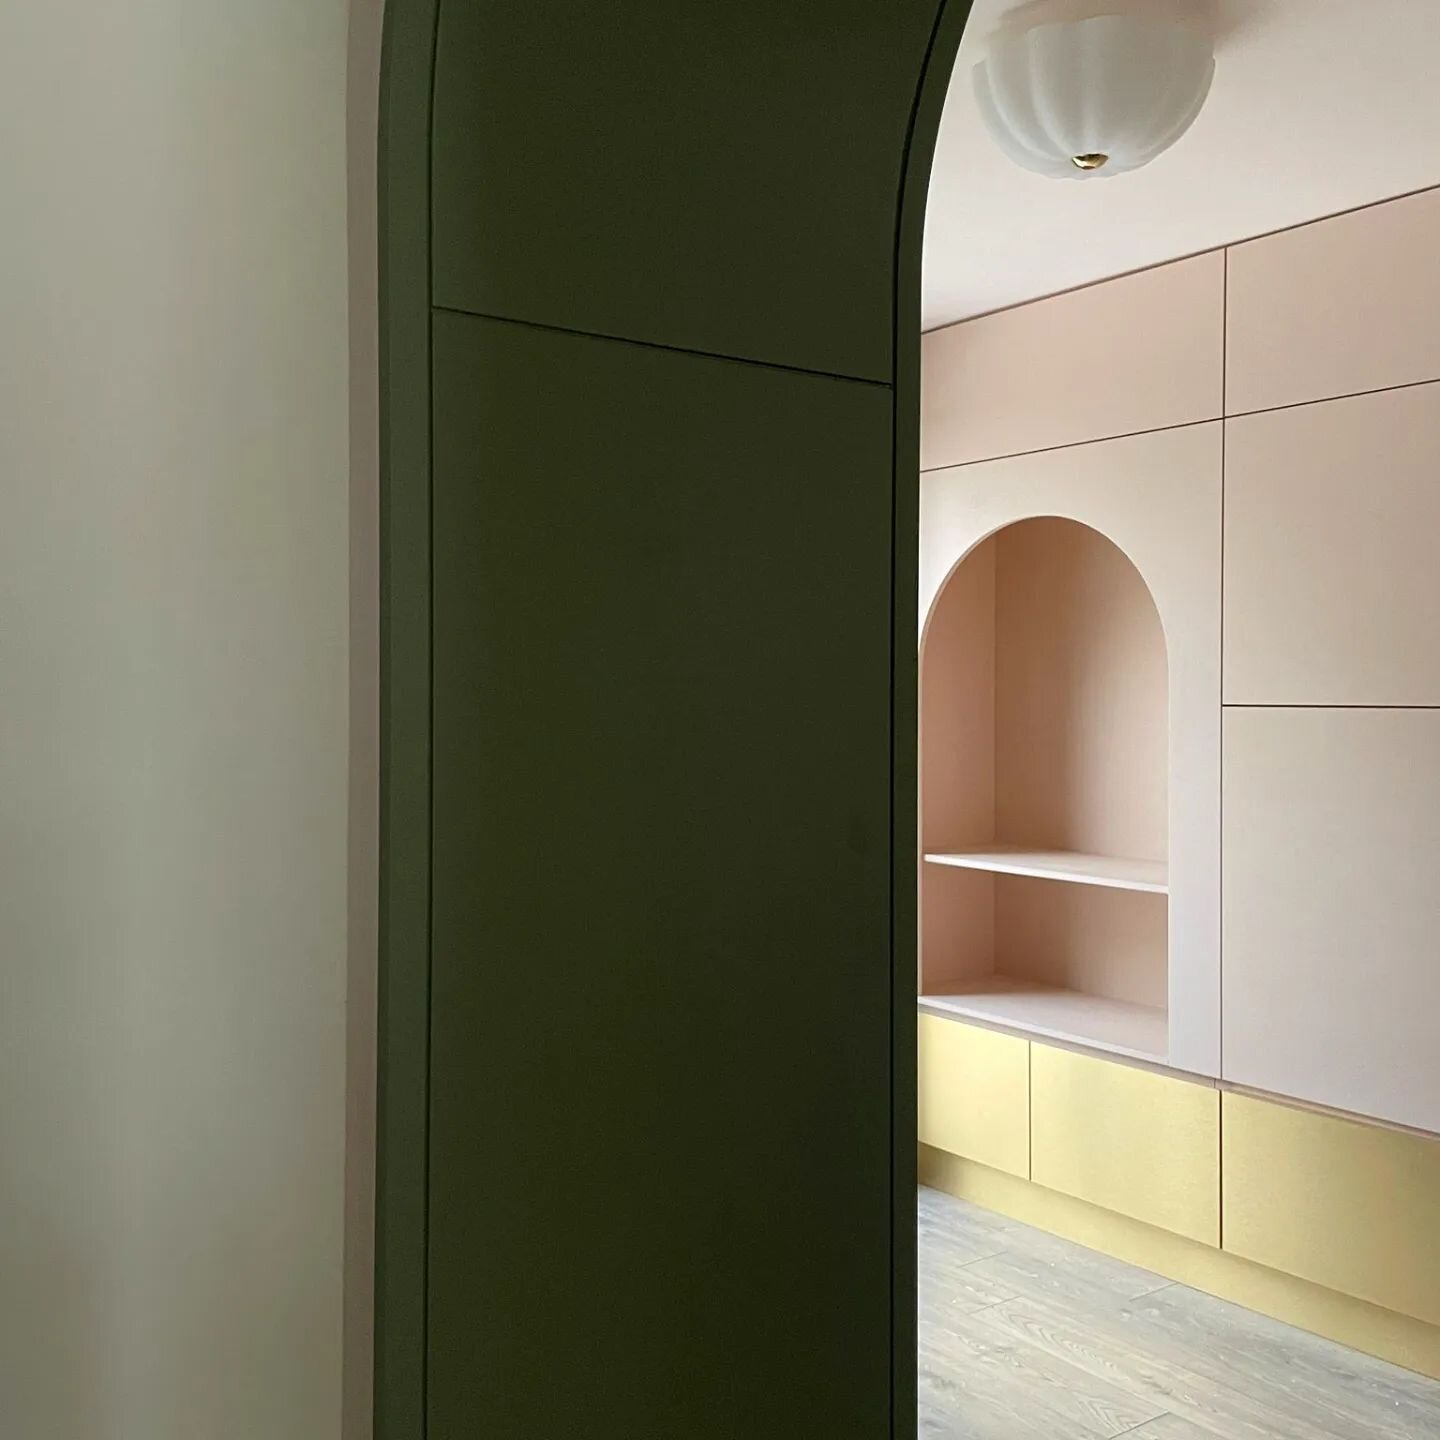 A little peek through the arch from the hallway of this pretty playroom. A dream project. 🌸🥦💛 Thanks to the beautiful client @lisamariedunne for sending me this photo #joinery  #bespokedesign #homereno #interiordesignservice #greenpinkgold #arch #